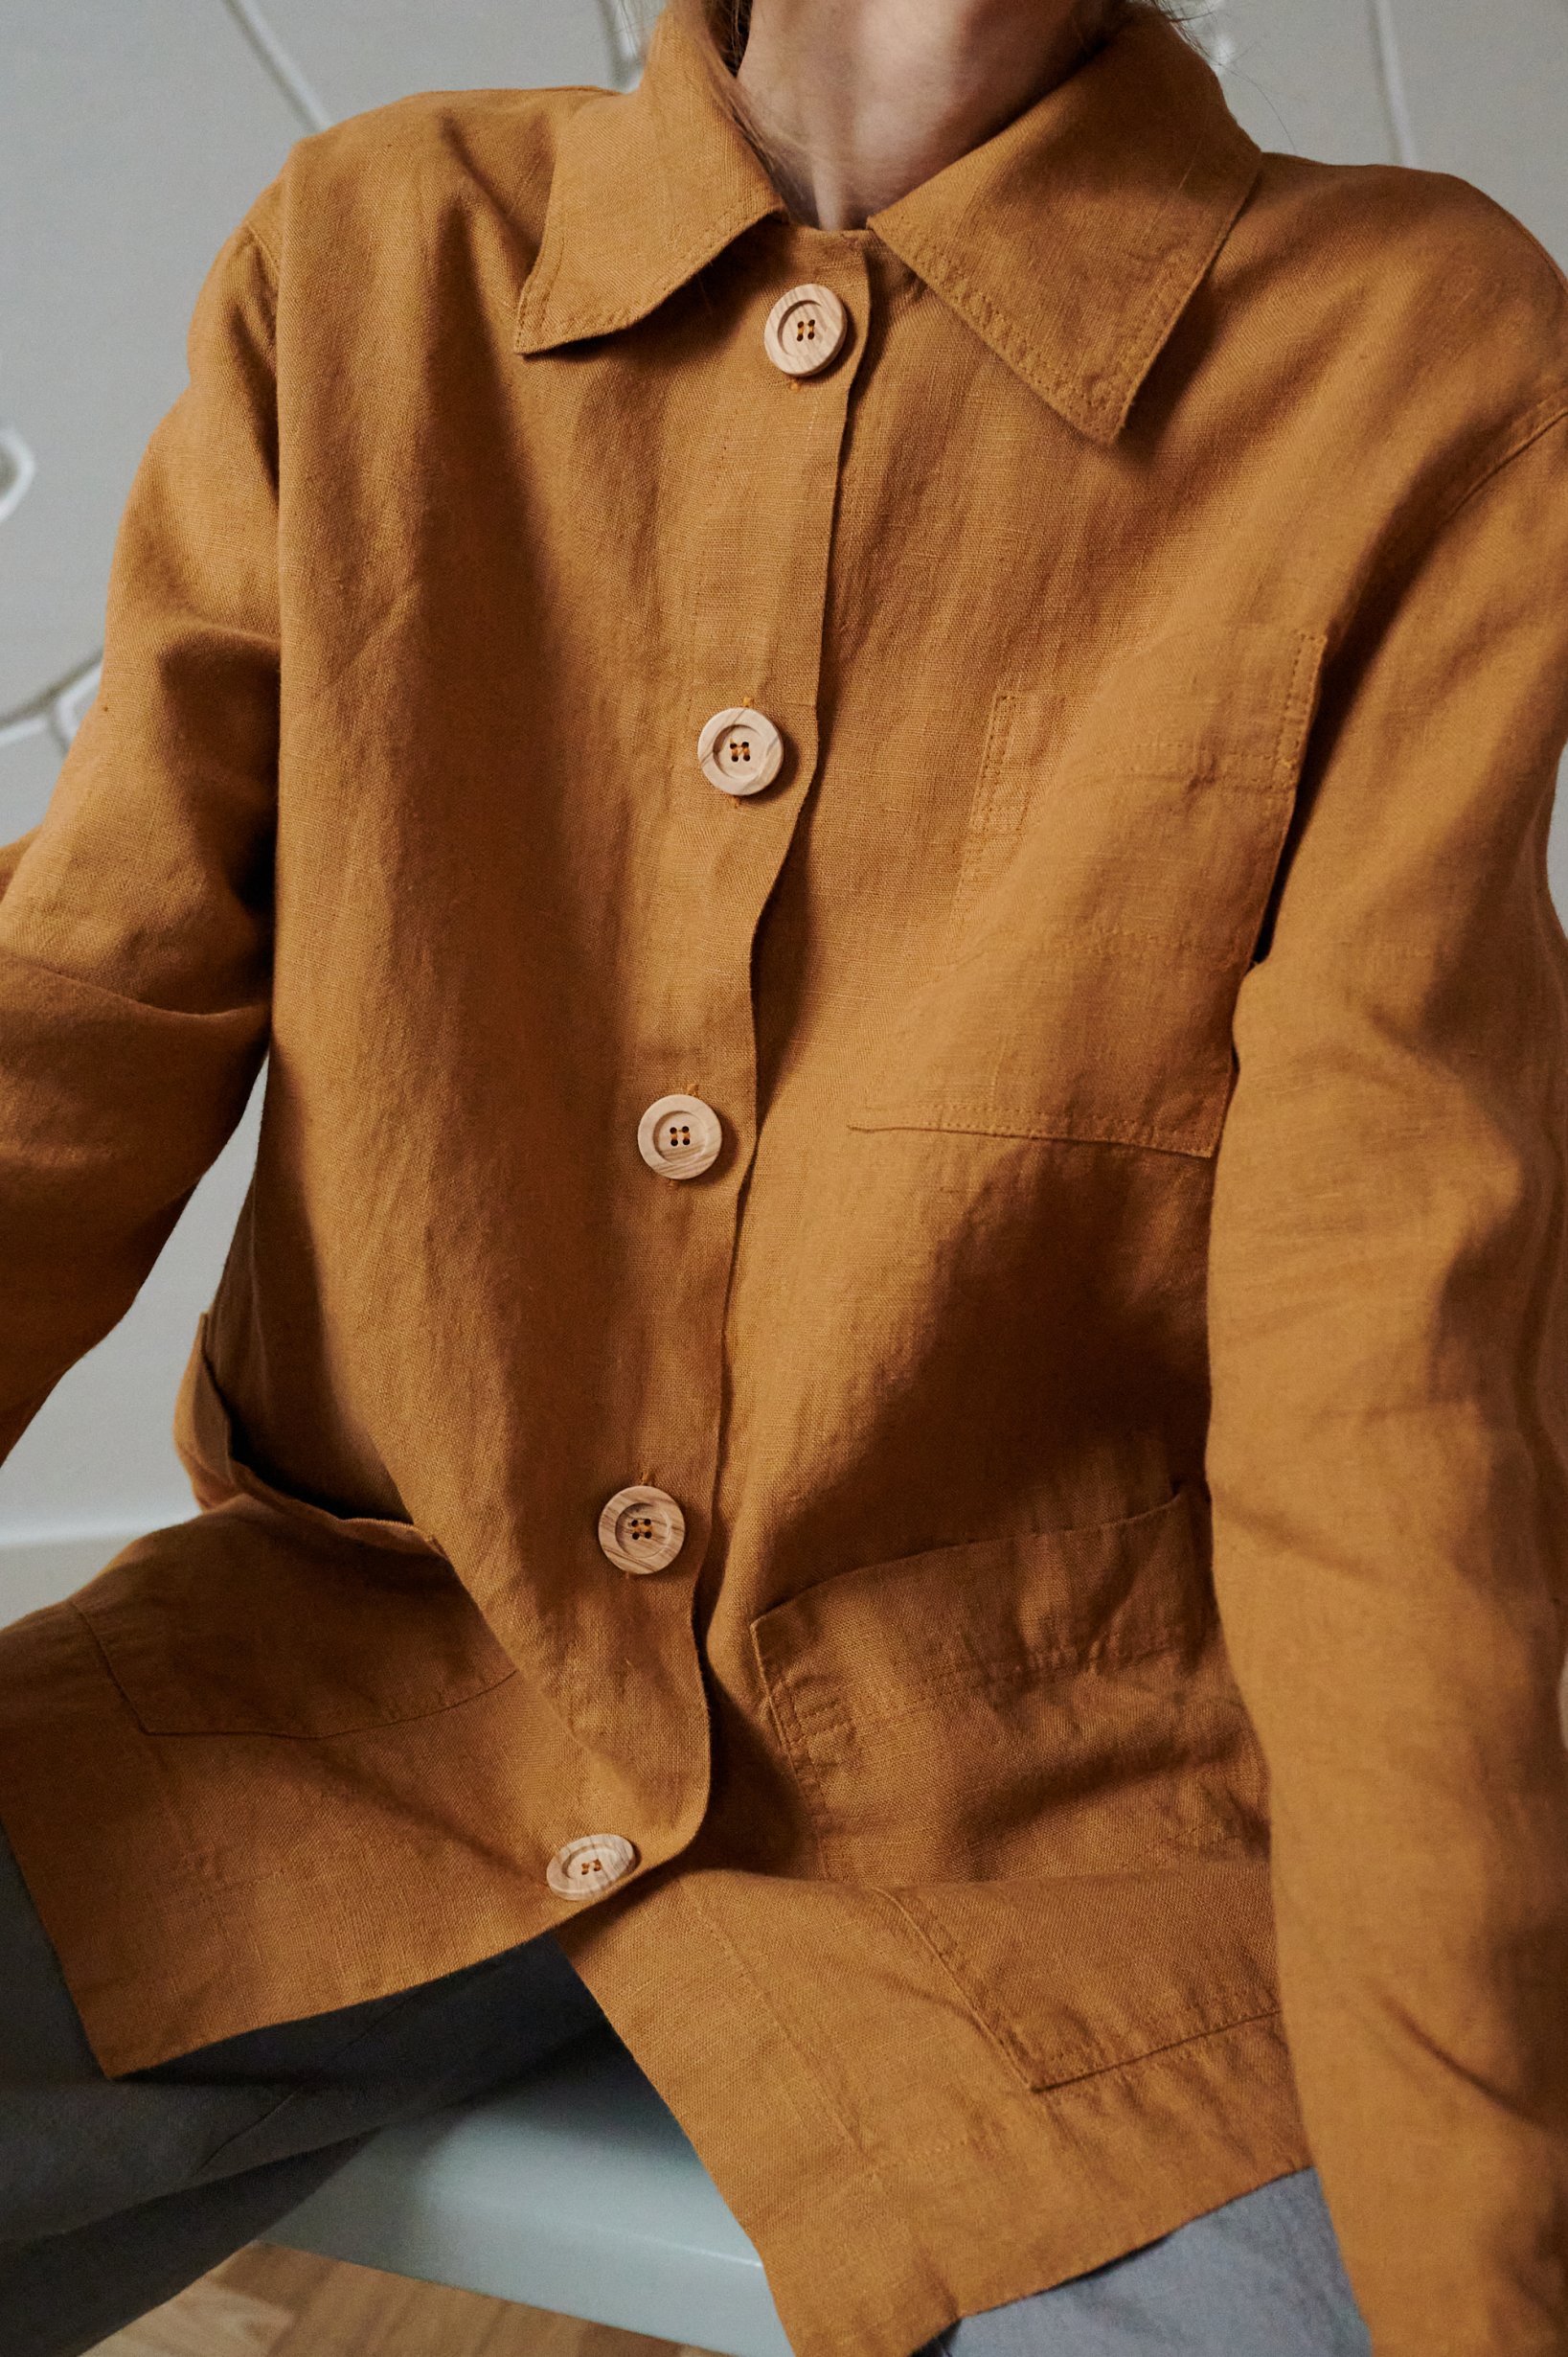 An oversized linen jacket with three patch pockets and wooden buttons